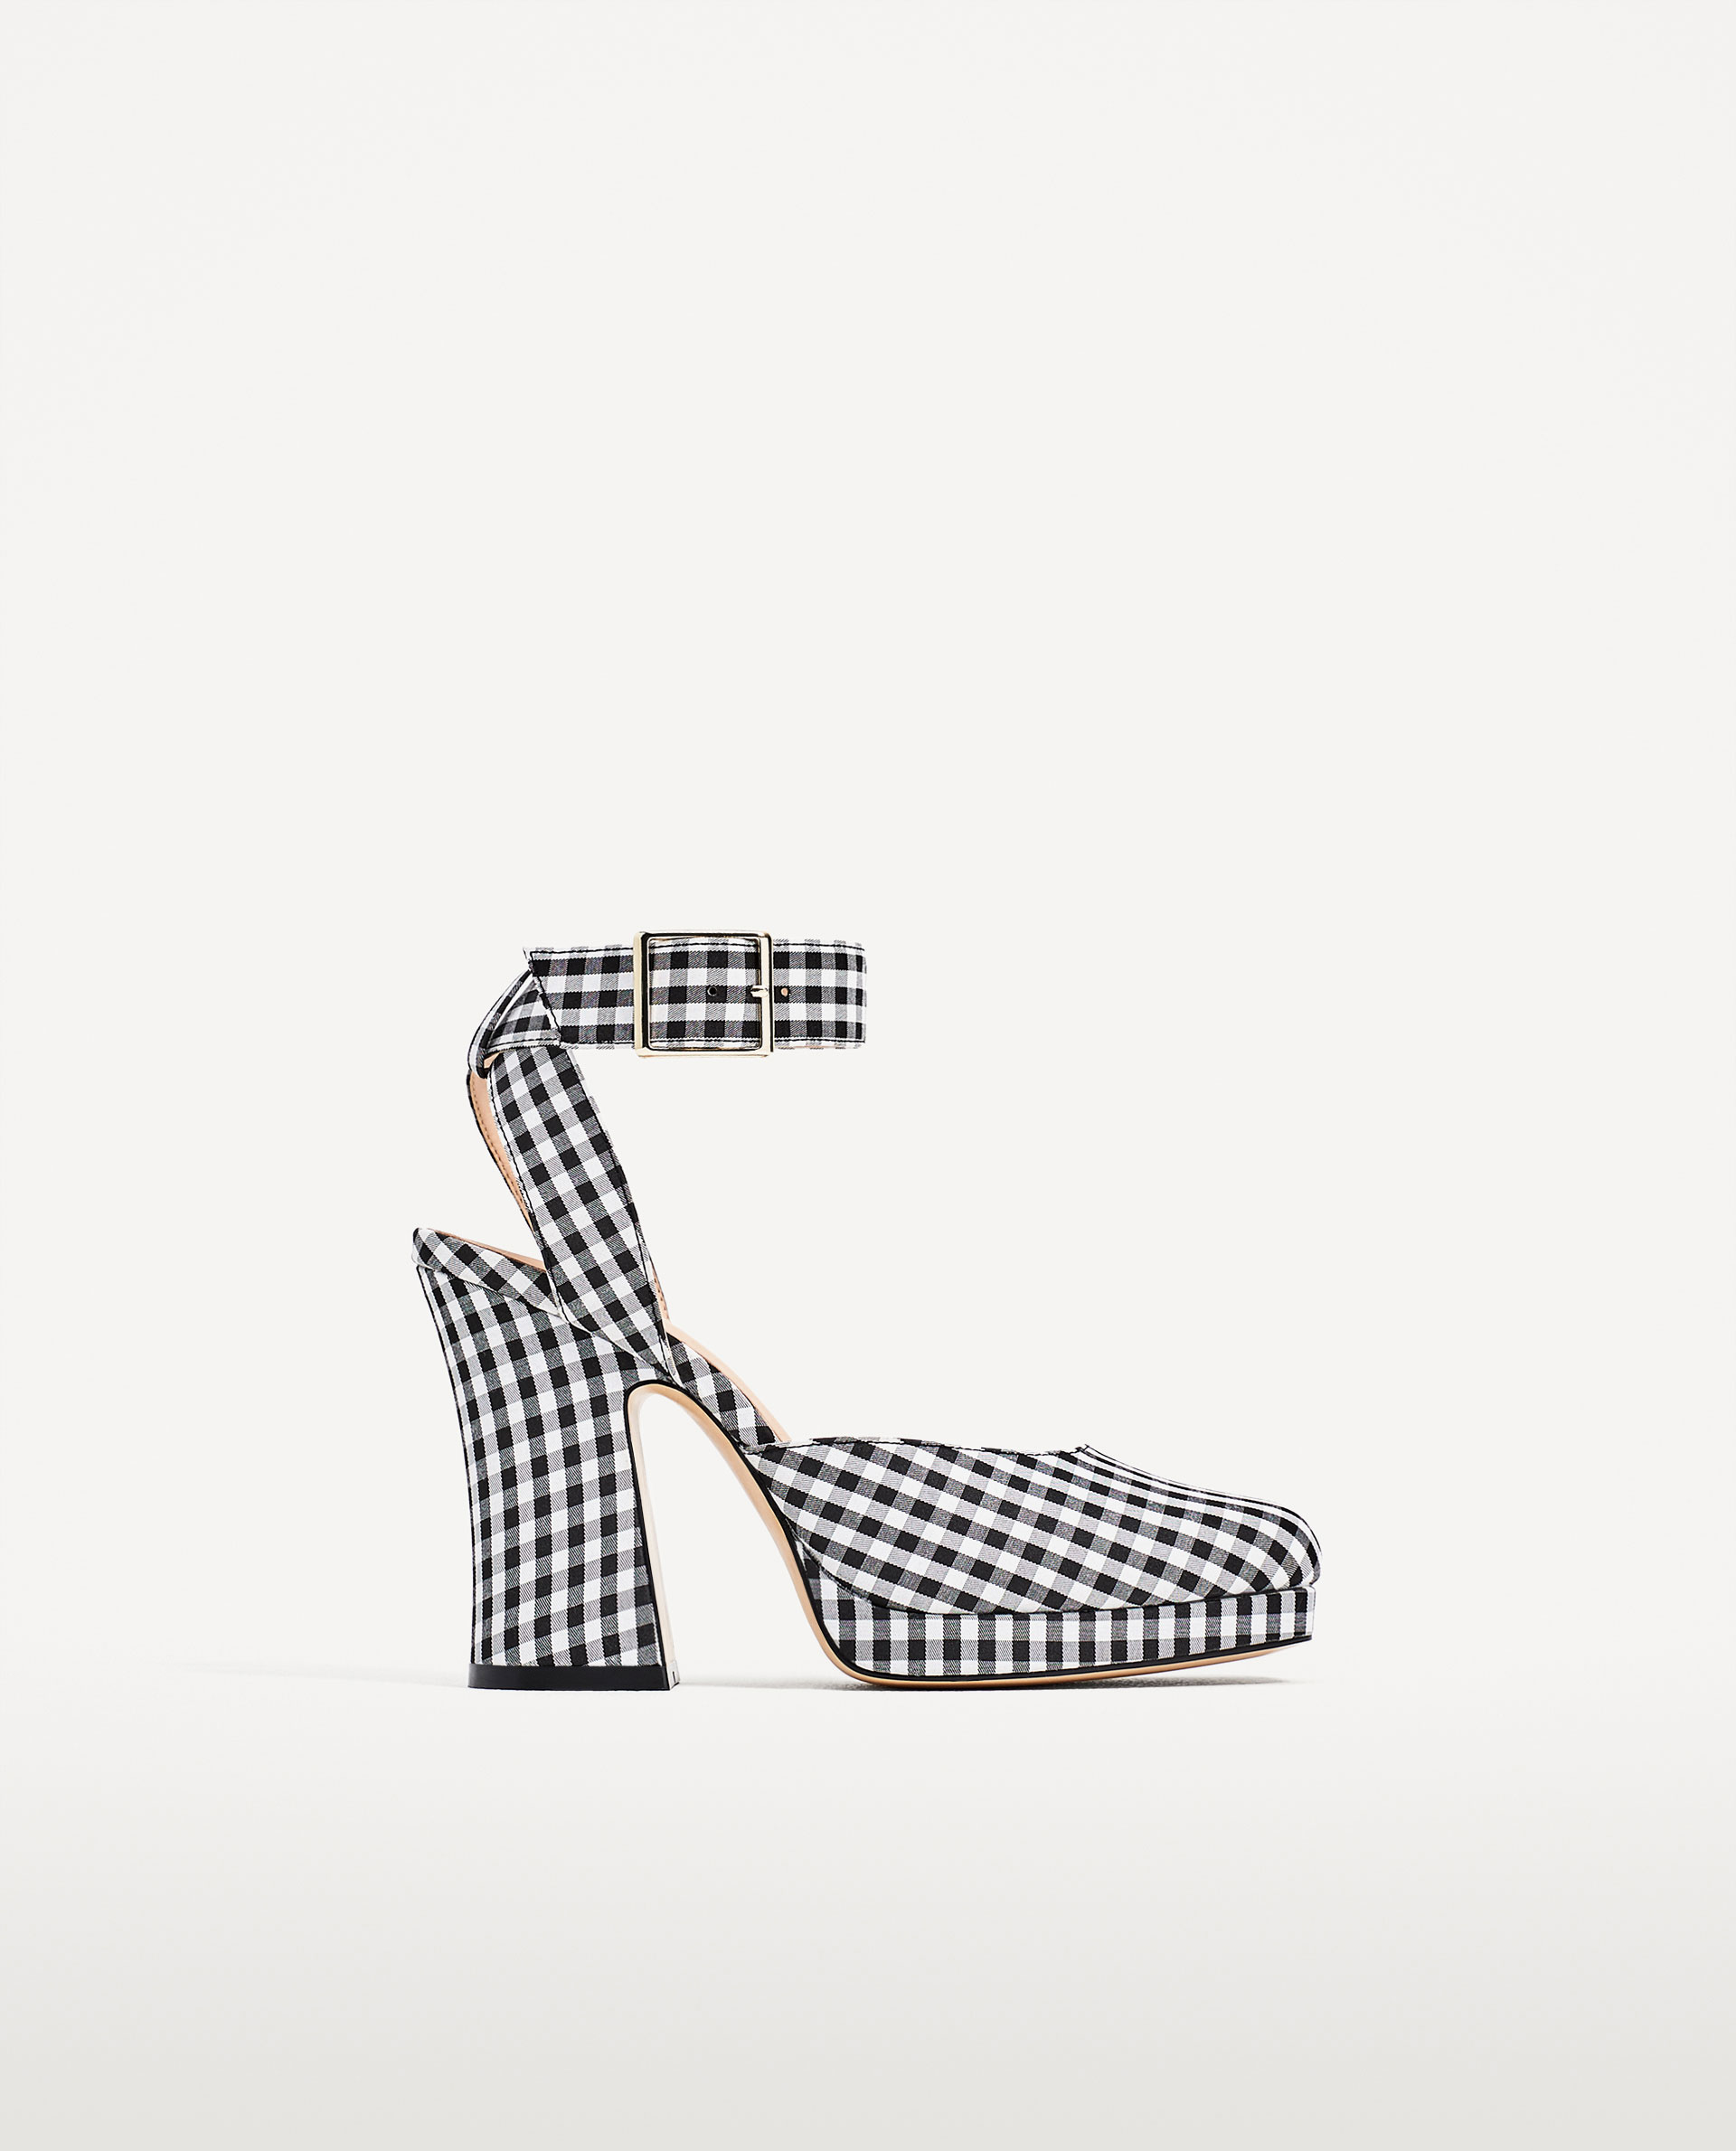 LOVE AT FIRST SIGHT: ZARA CHECKERED SHOES